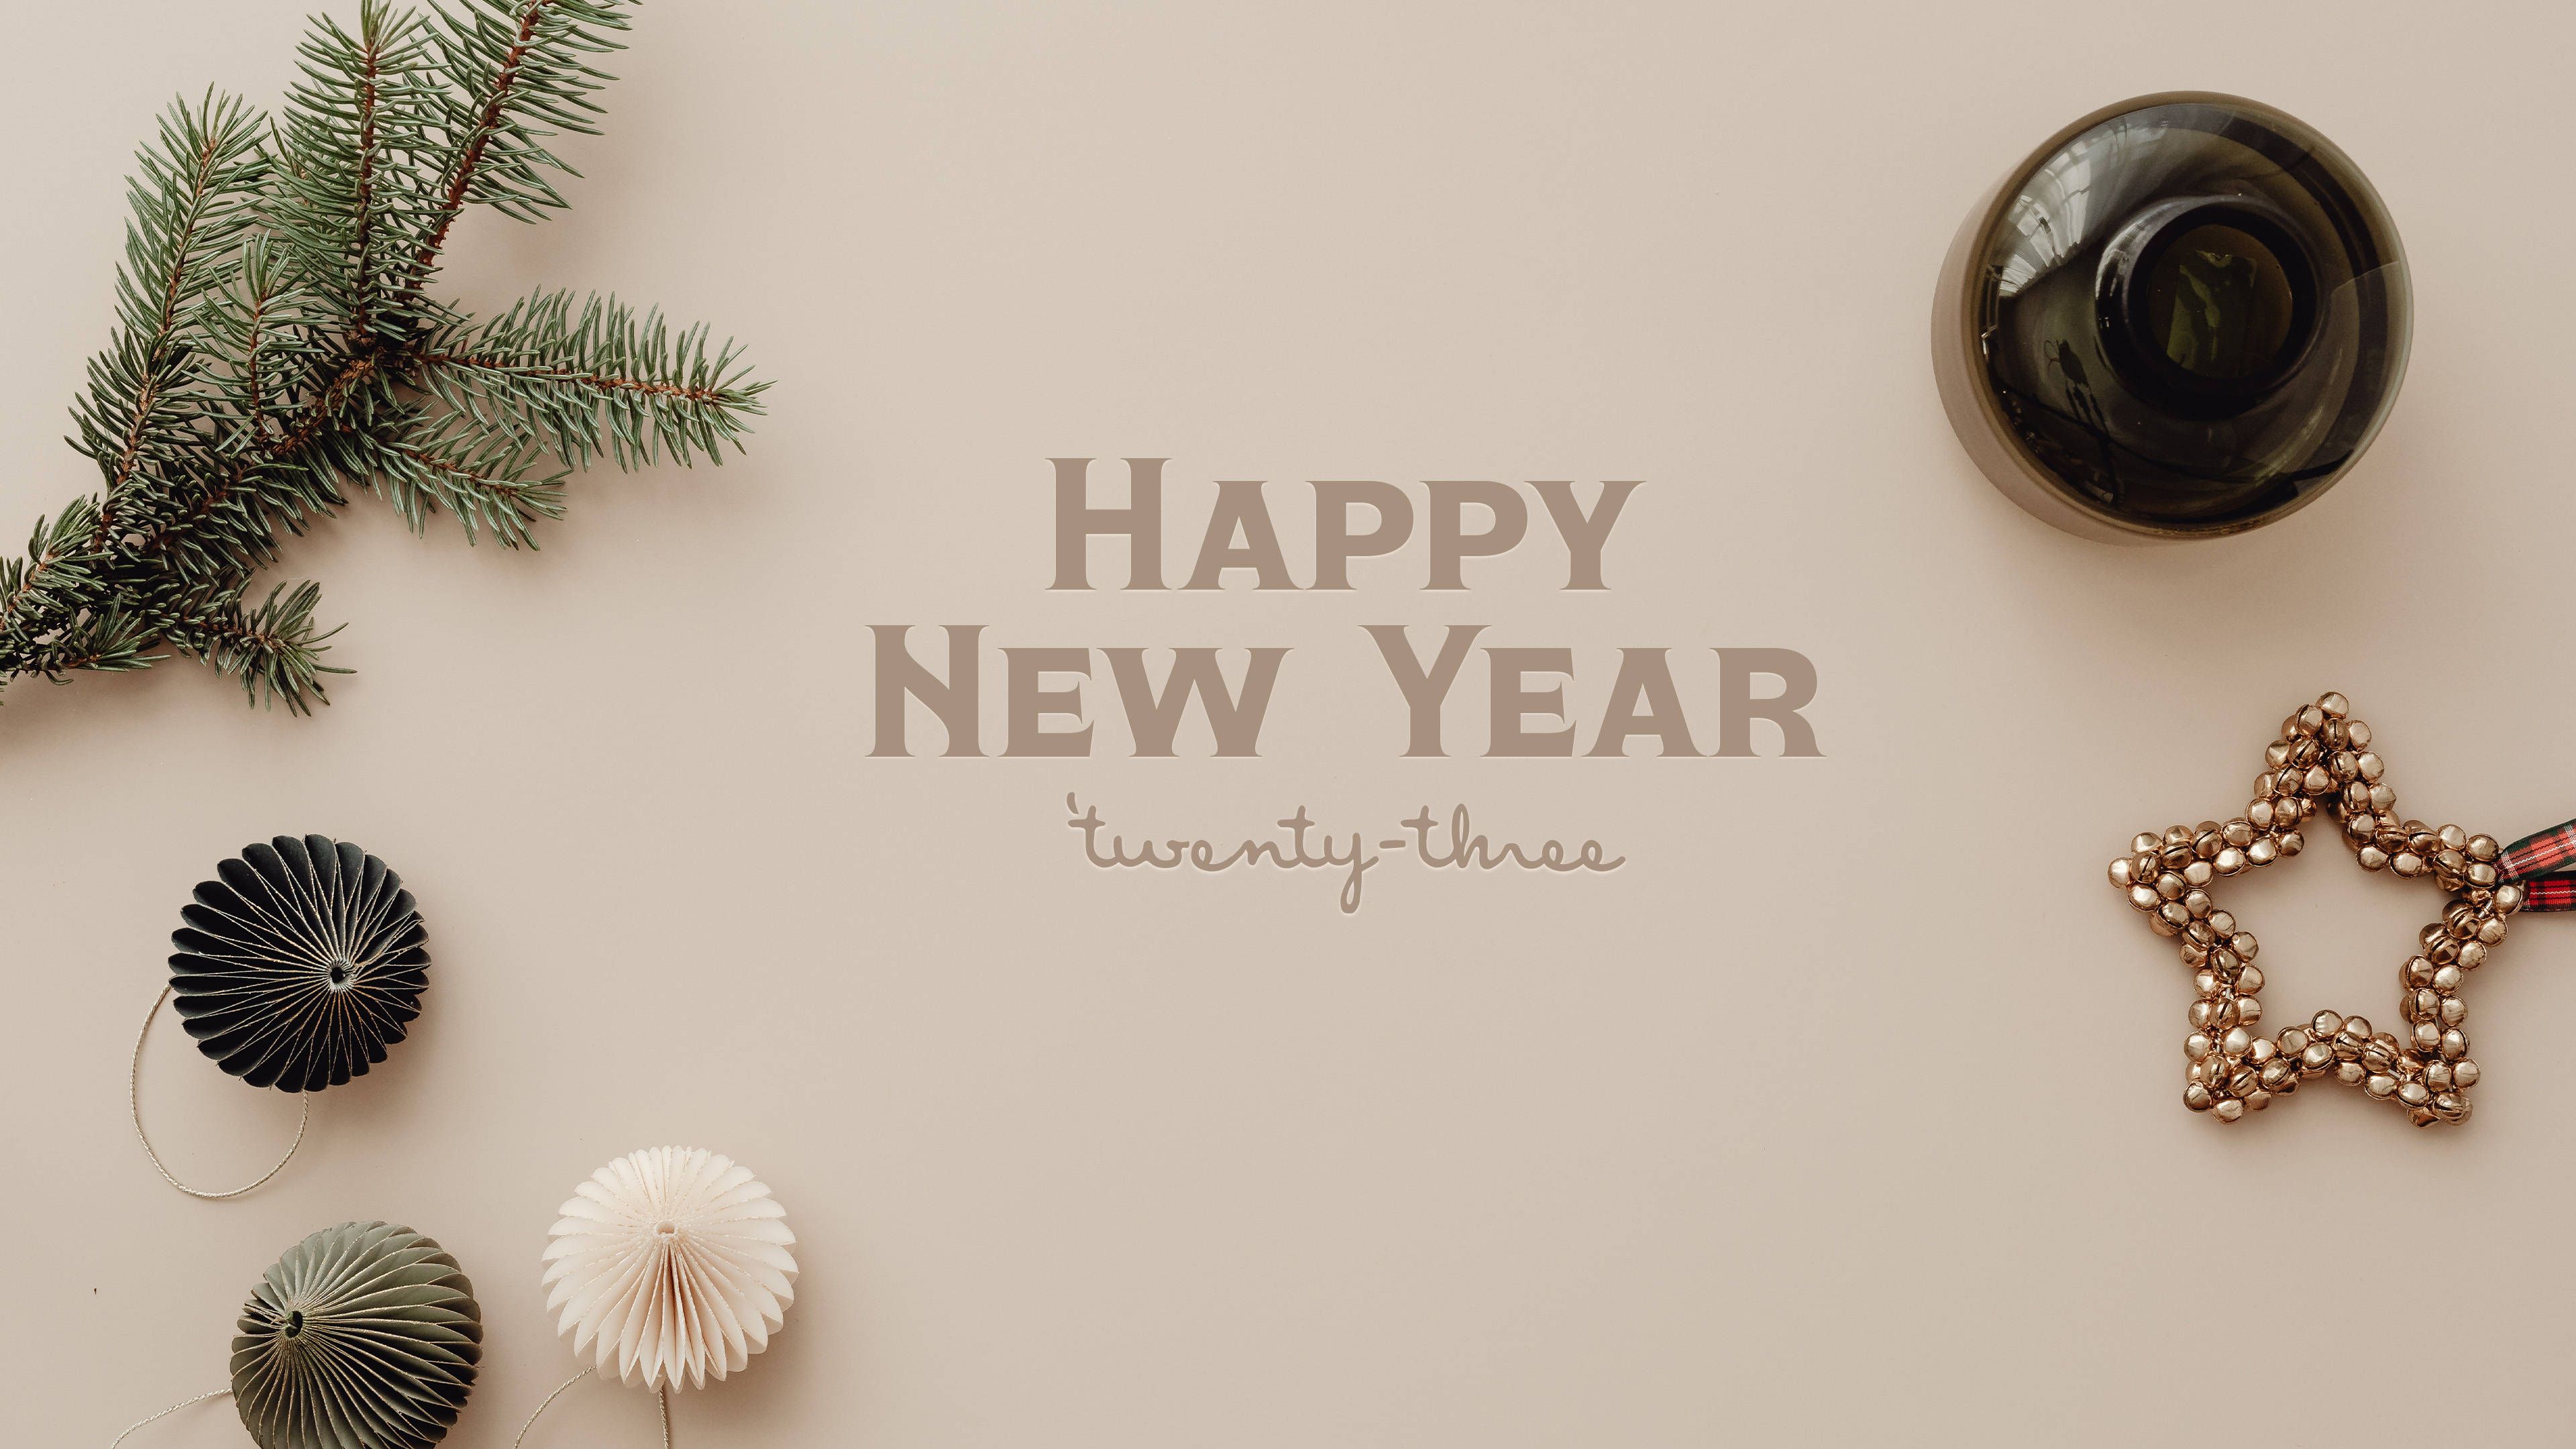 Happy New Year 2023 text with a pine branch and Christmas decorations on a beige background - New Year